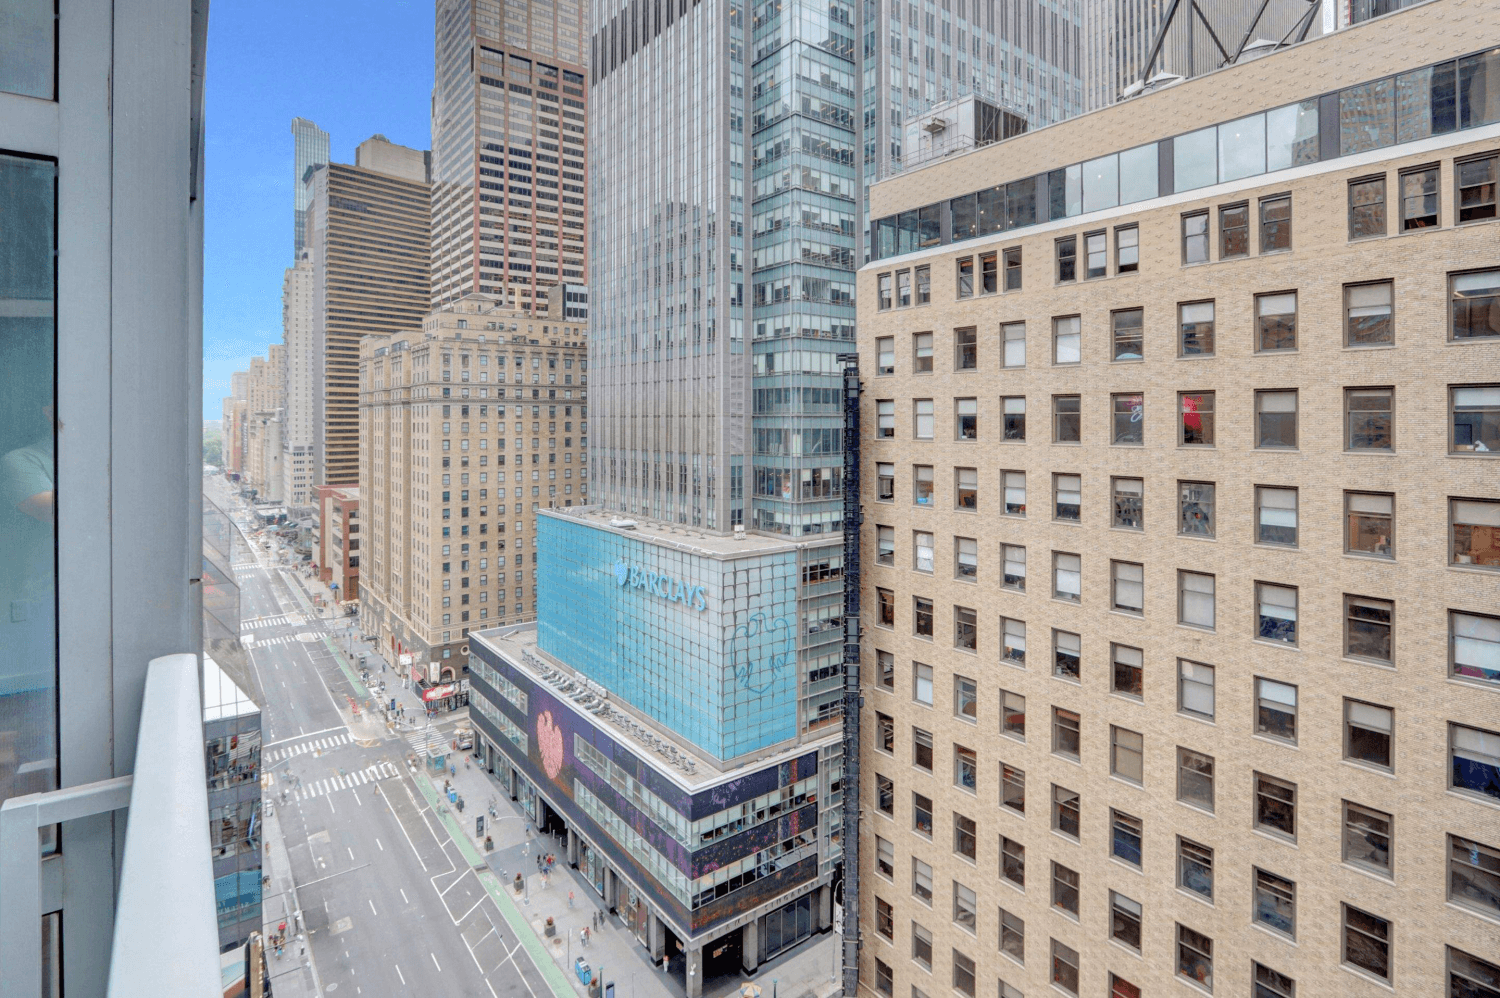 This beautiful 1 br, Condo with a home office features, a modern kitchen, floor to ceiling windows, high ceilings, balcony off master bedroom, along with 24 hour doorman, security cameras ...